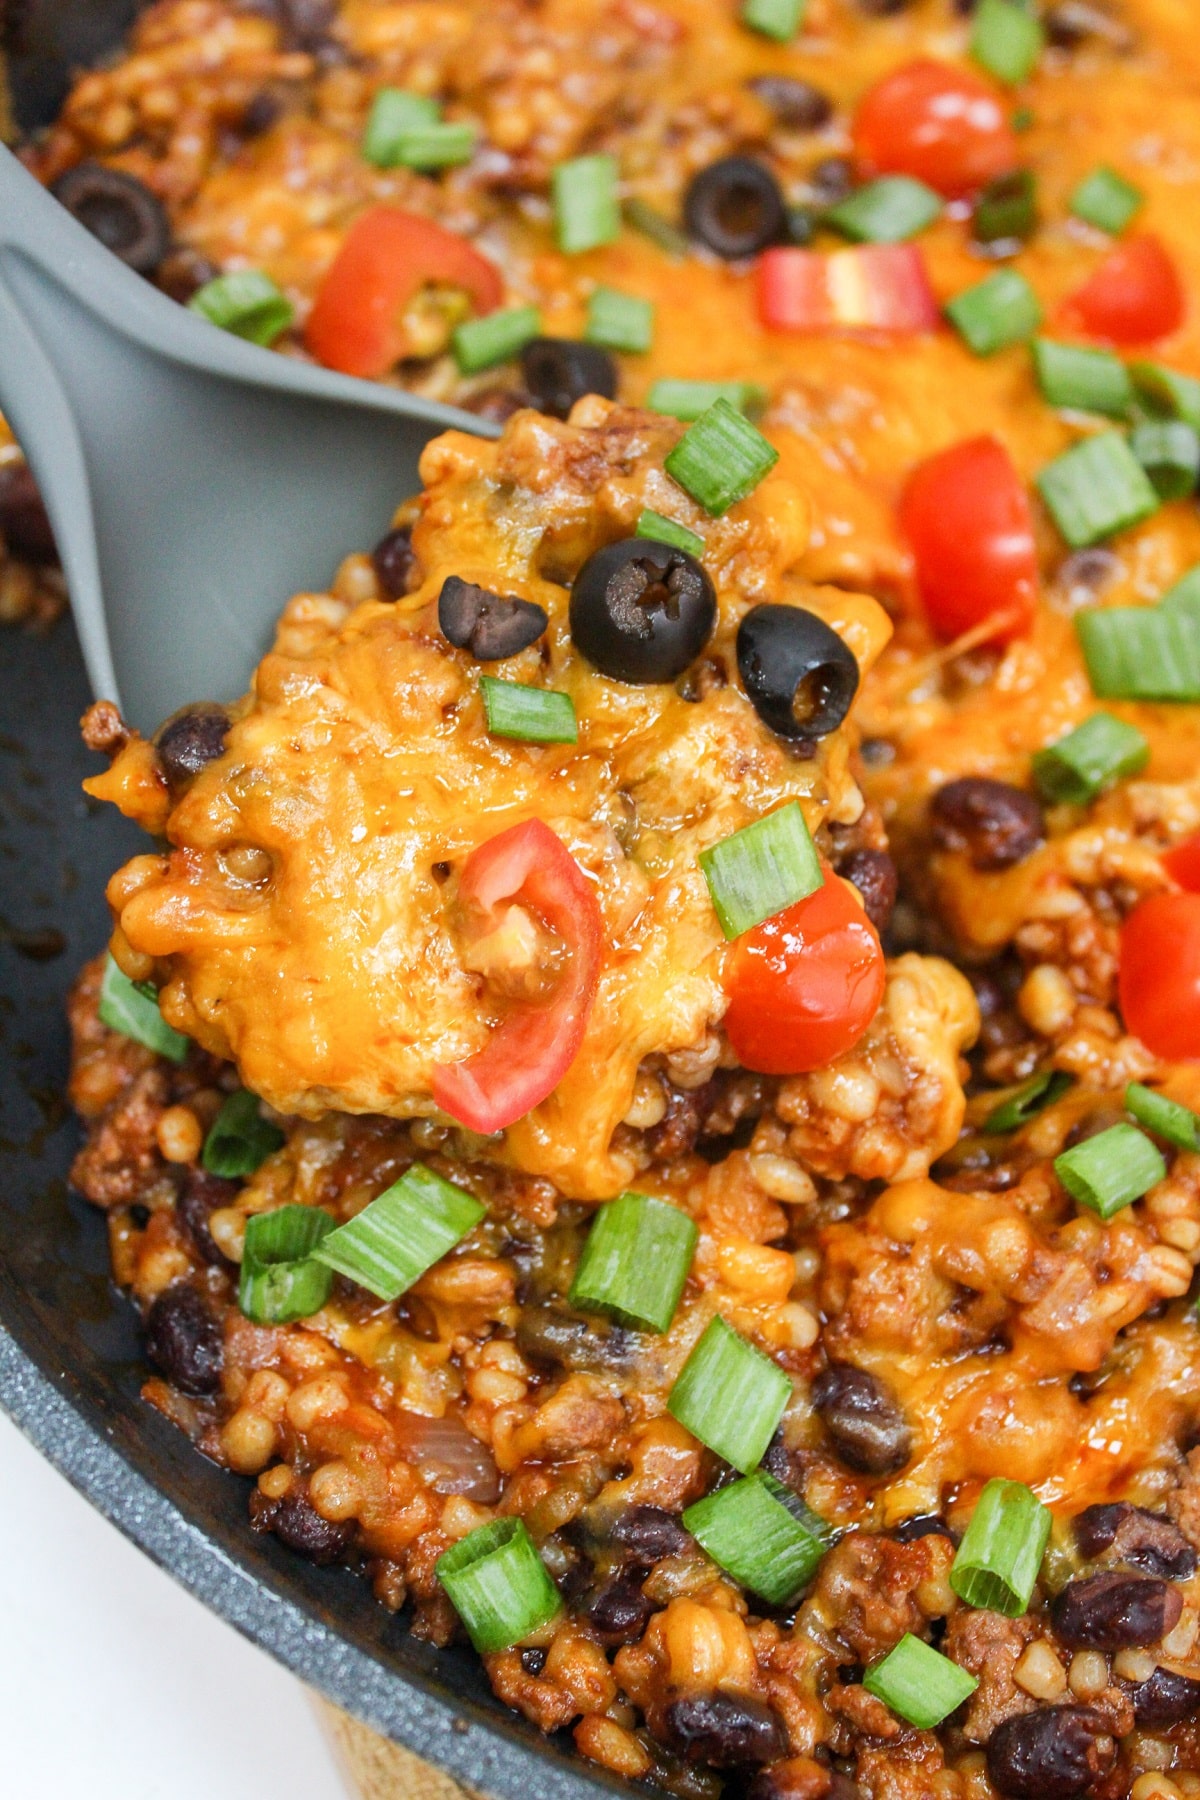 Cheesy Taco Barley Skillet cooked in a pan topped with cheese, black olives, tomatoes, and green onion. Scooped from the skillet with a serving spoon.